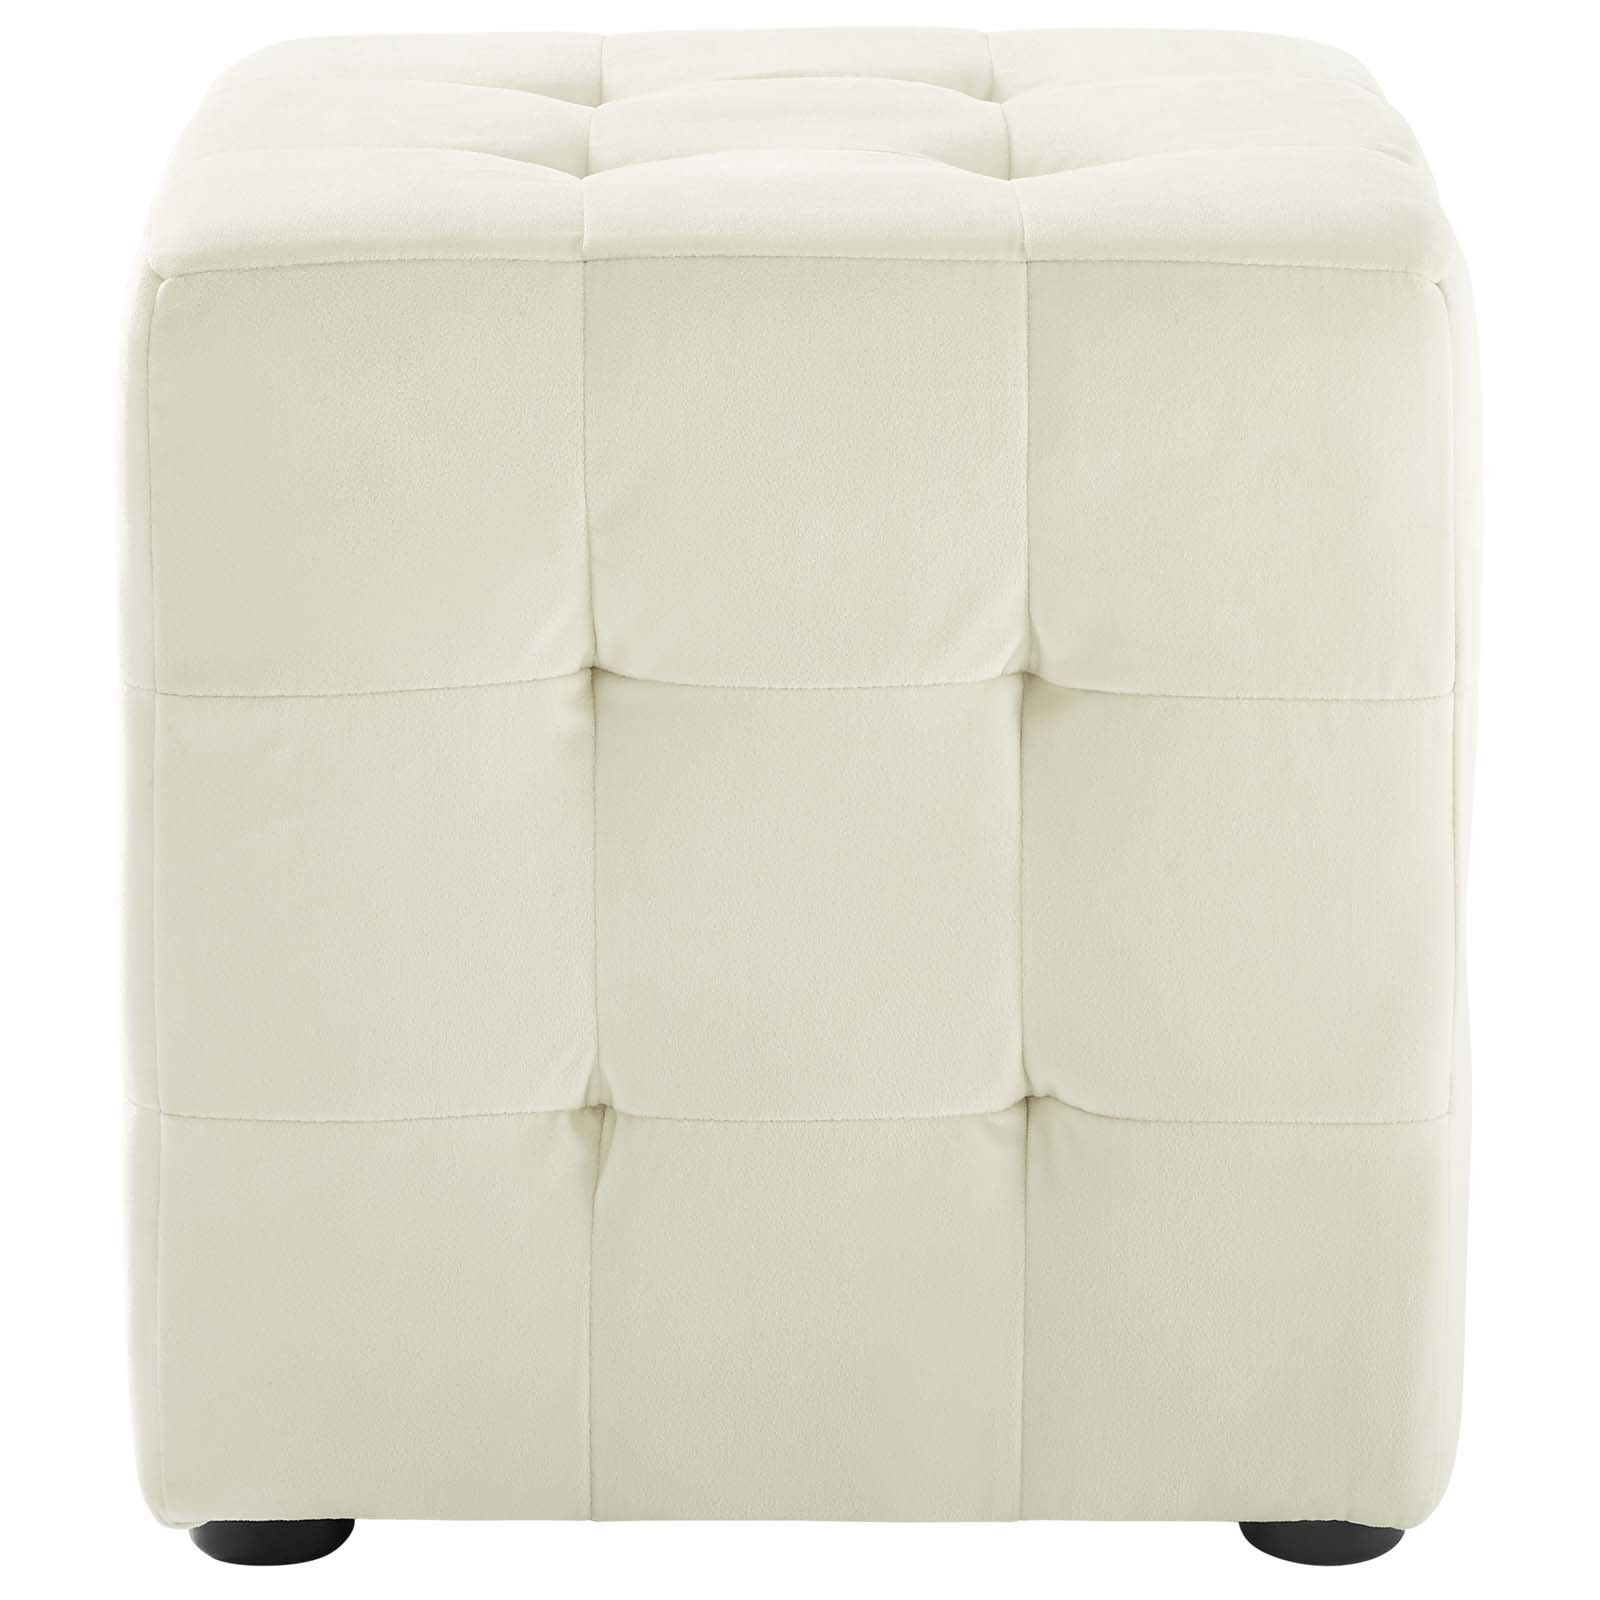 Contour Ivory Tufted Cube Performance Velvet Ottoman Eei 3577 Ivo Inside Light Blue And Gray Solid Cube Pouf Ottomans (View 19 of 20)